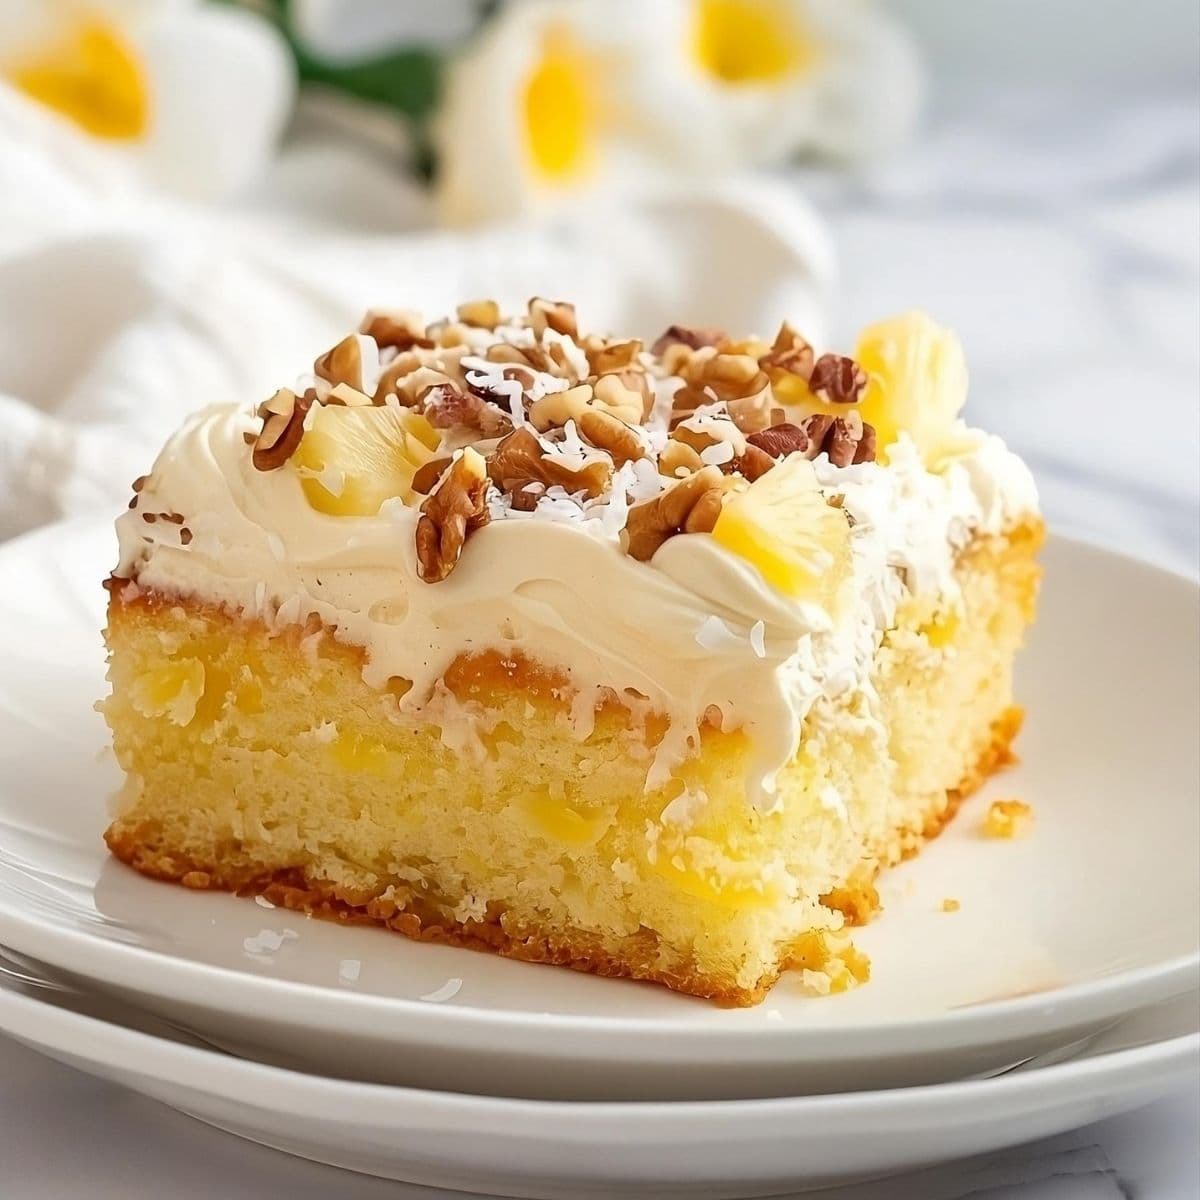 Slice of pineapple sheet cake with creamy frosting garnished with chopped pecans served in a white plate.